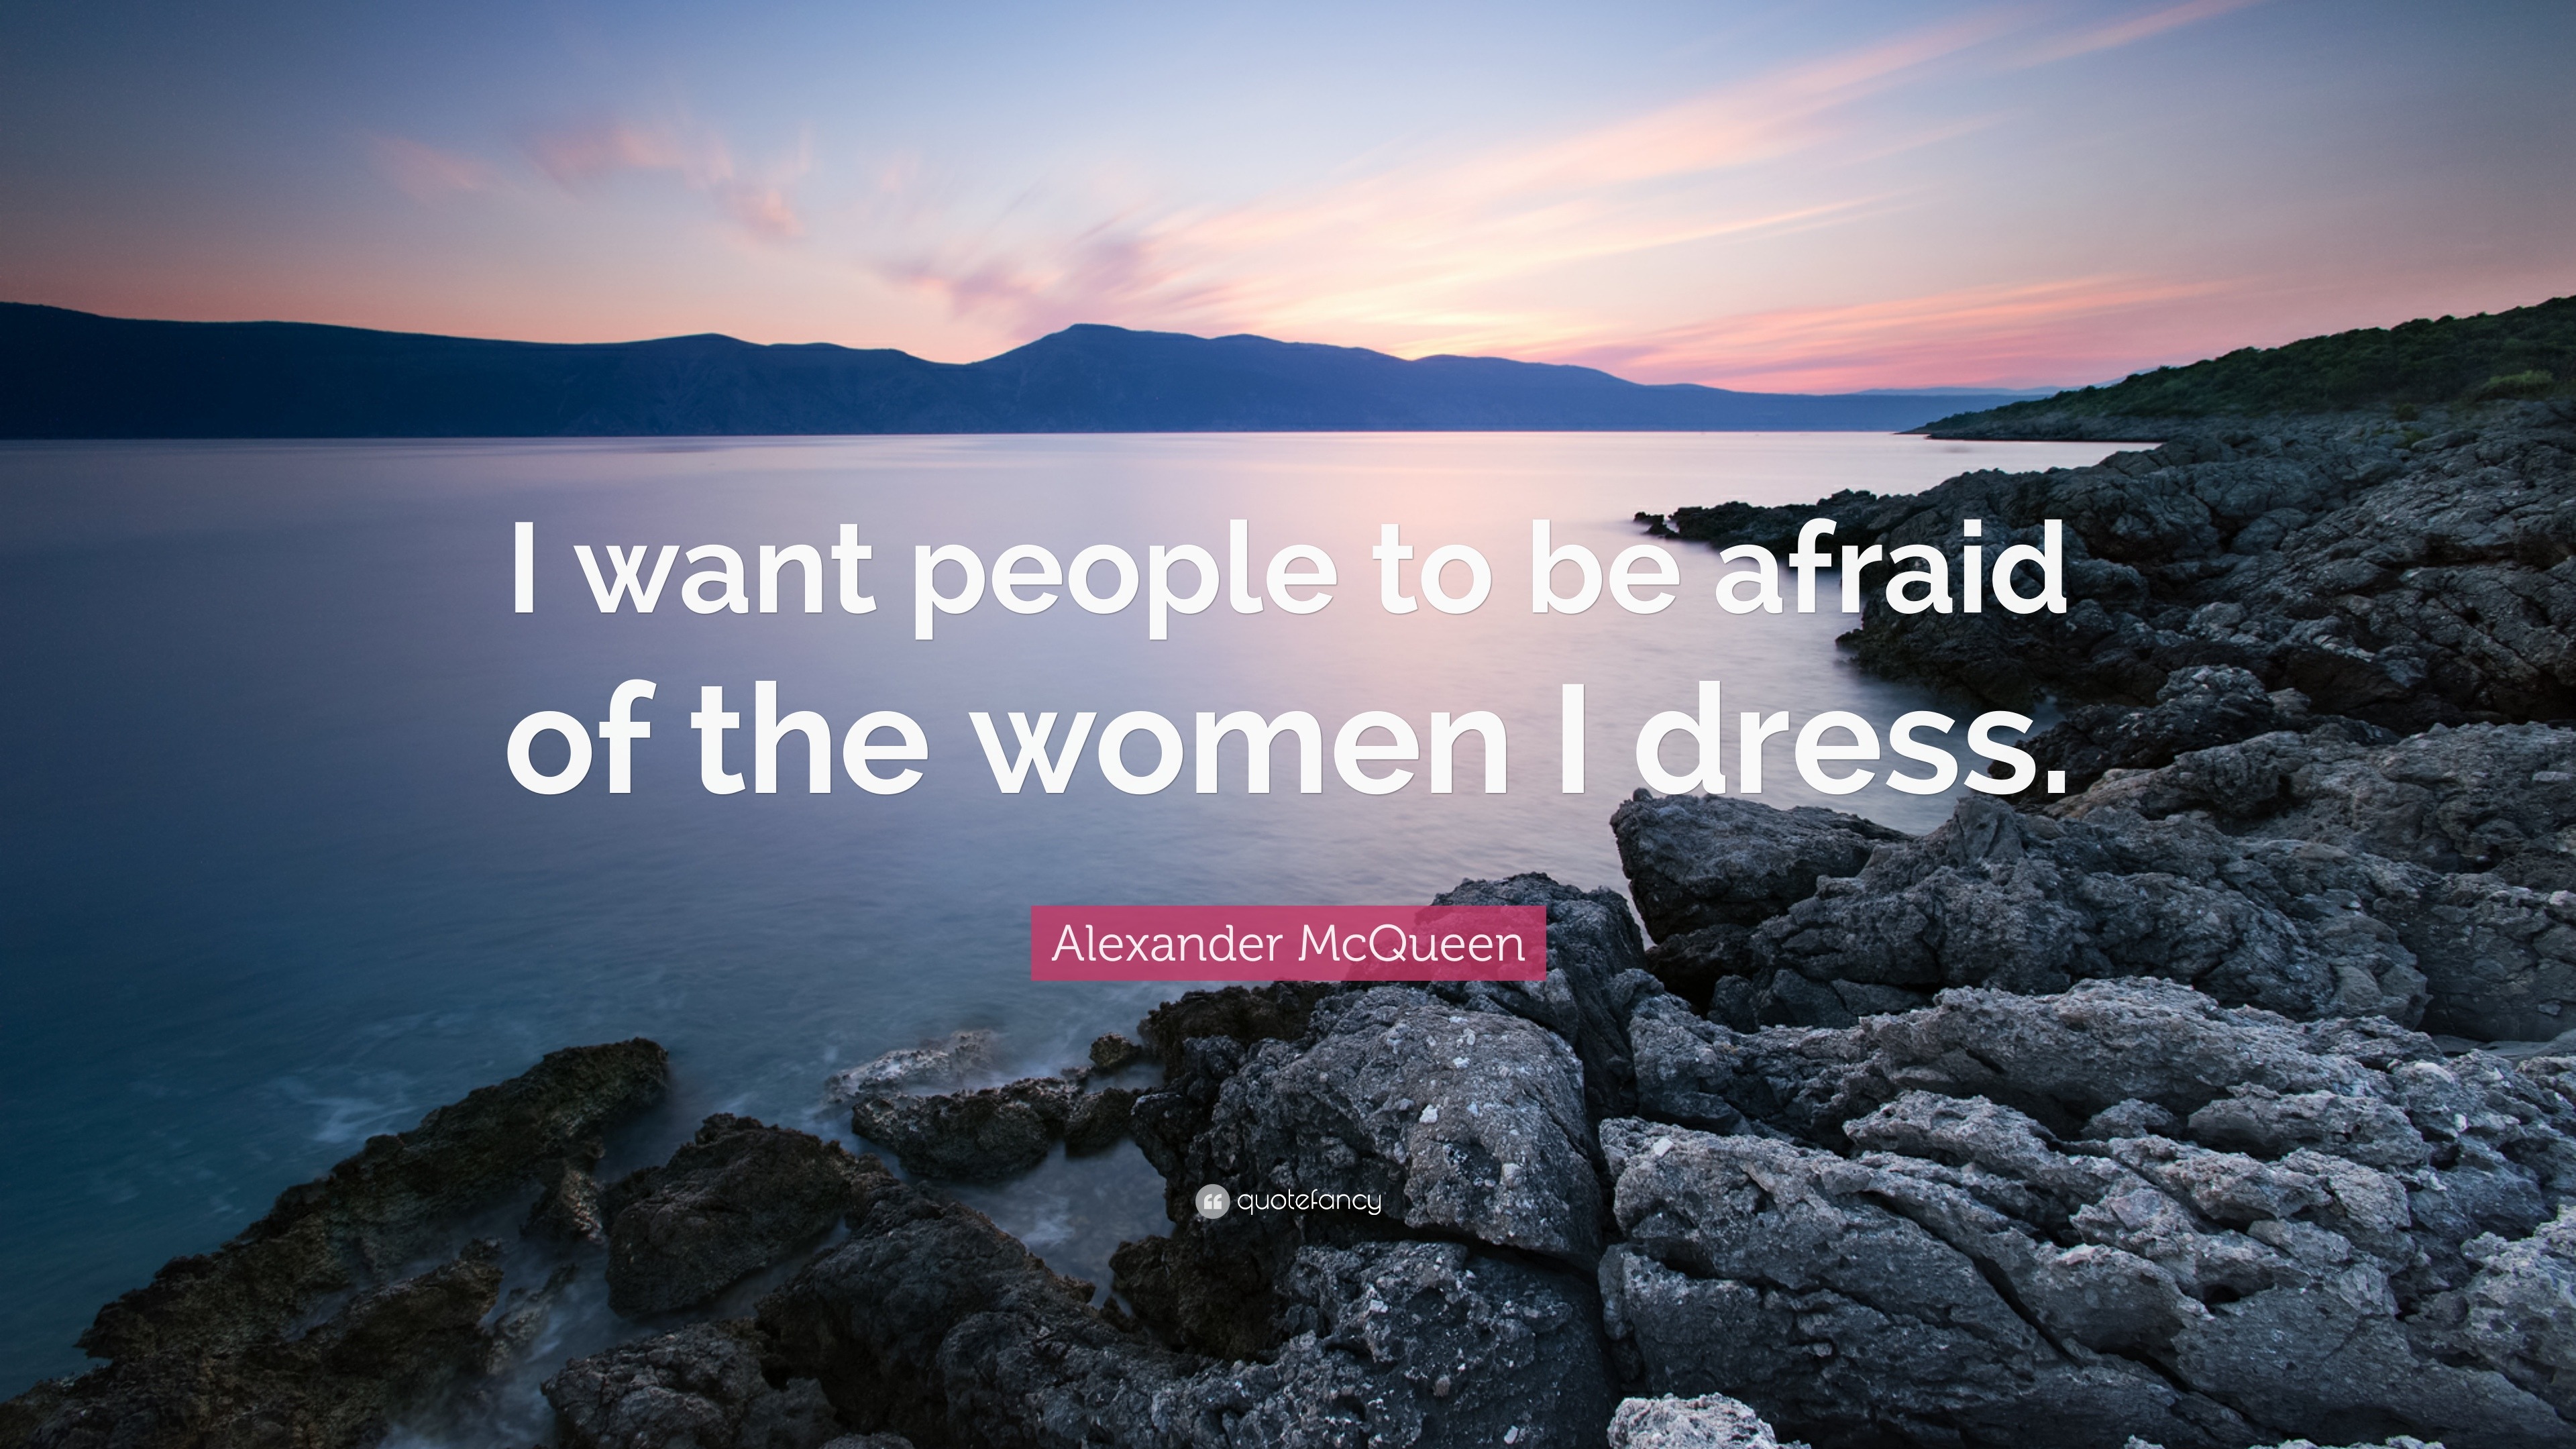 I want people to be afraid of the women I dress': the celebrated